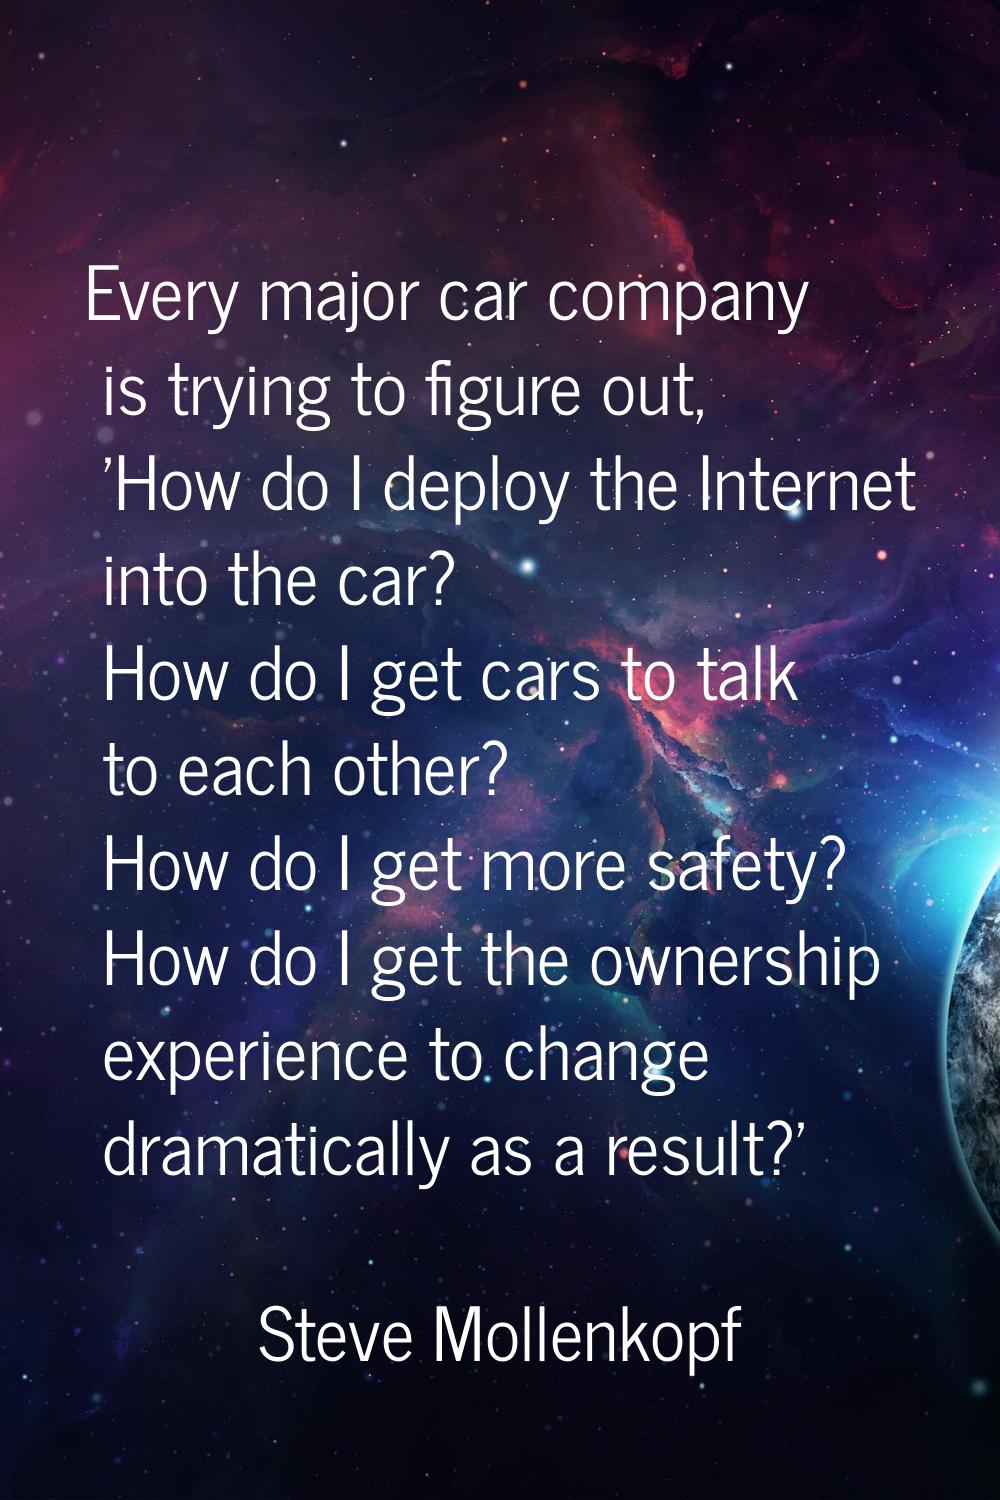 Every major car company is trying to figure out, 'How do I deploy the Internet into the car? How do